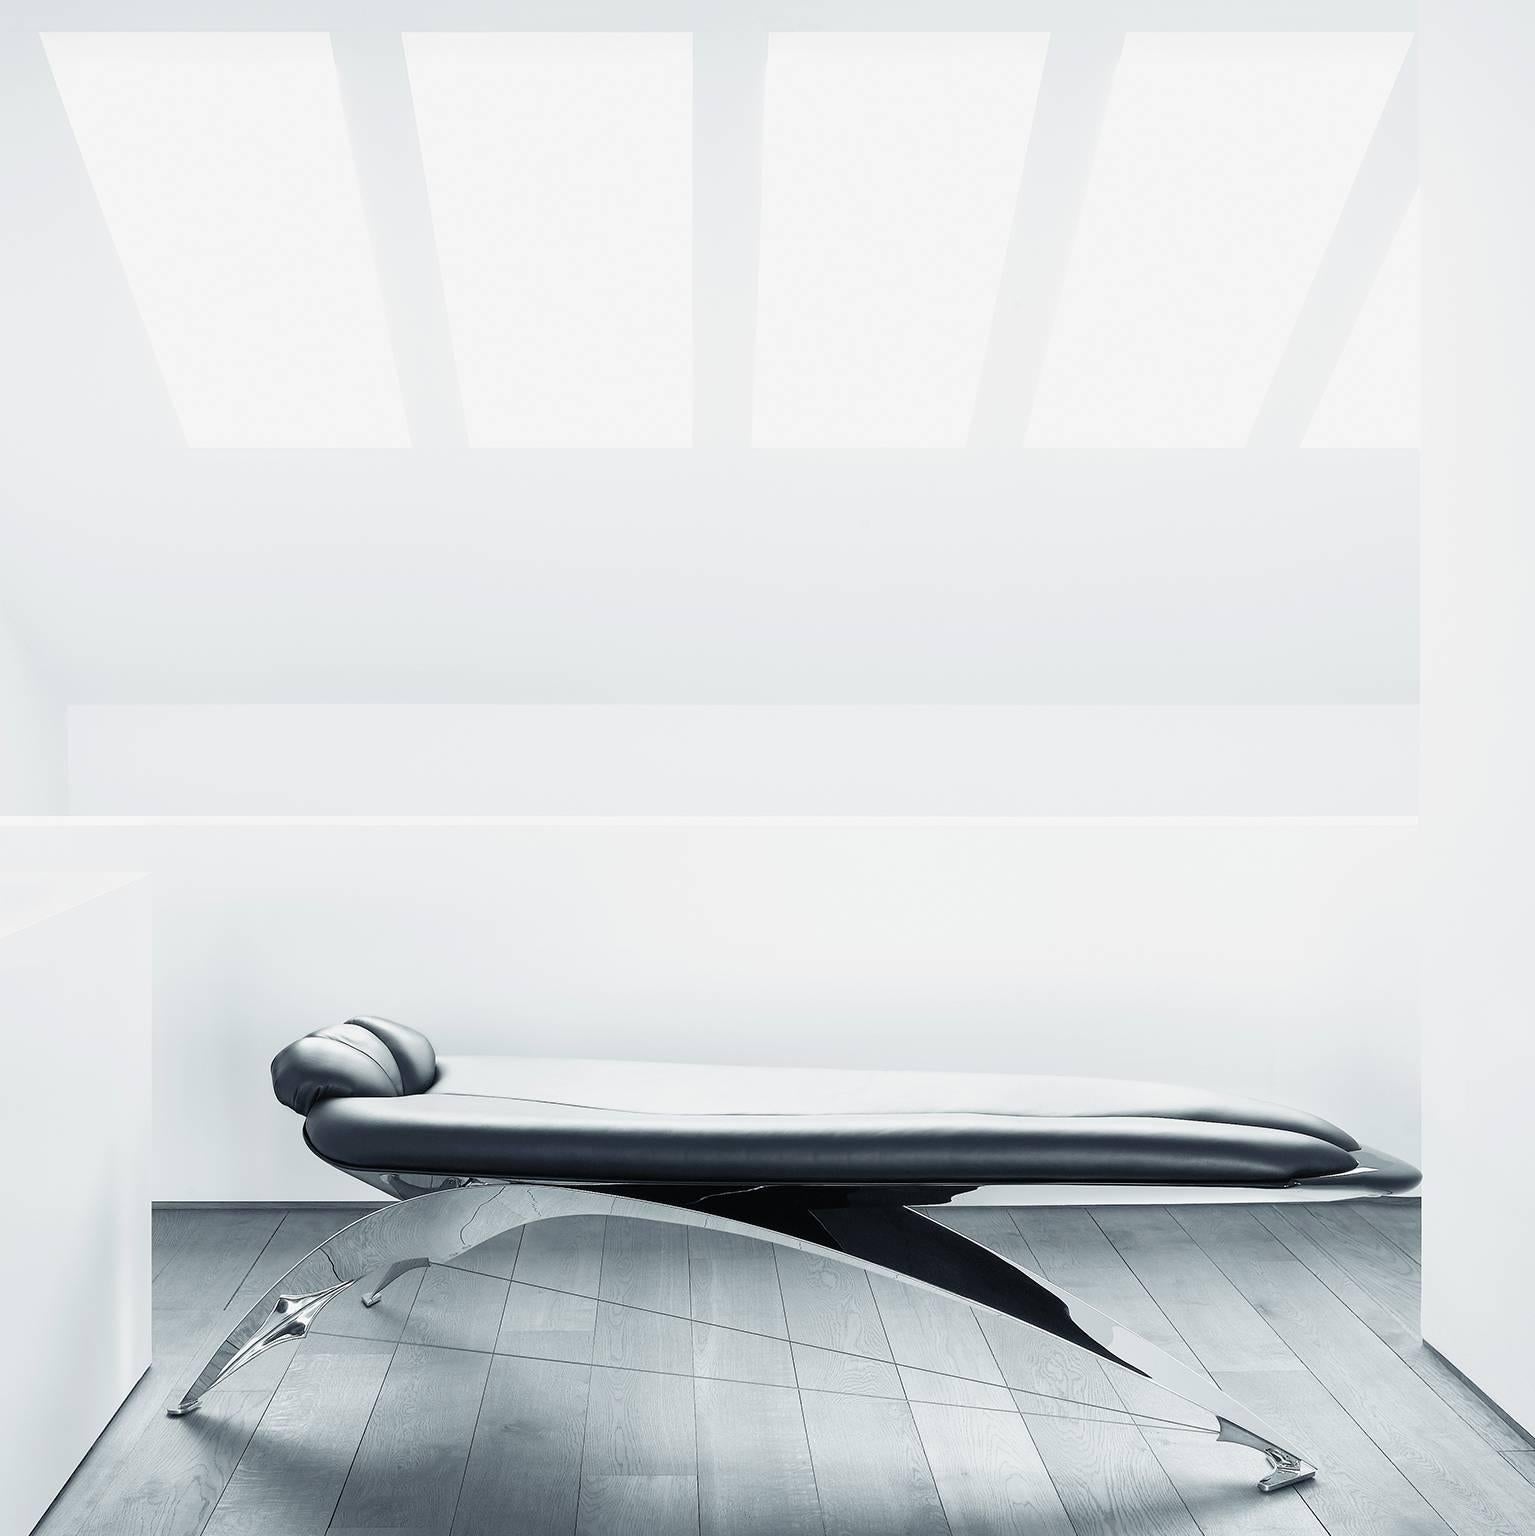 Created by architect Santiago Calatrava in 1986 presents this recliner in a beautiful and futuristic look. The main supportive element is made of one elegant chrome steel substructure and the reclining area and the head cushions are made with